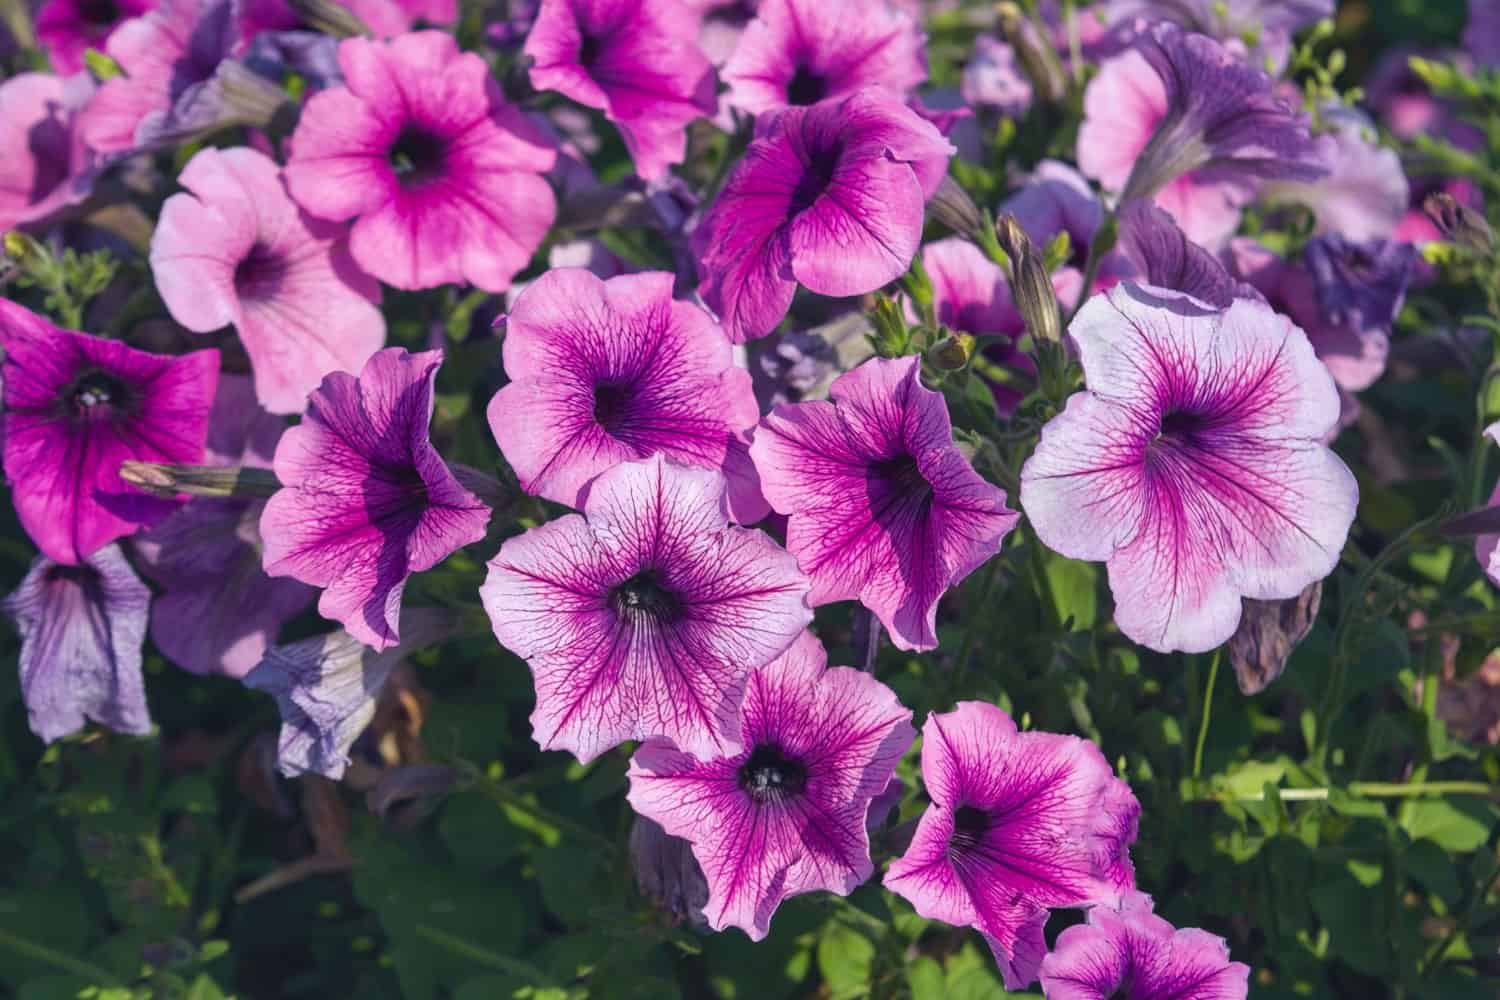 Mixture of bright and deep purple leaves of Petunias